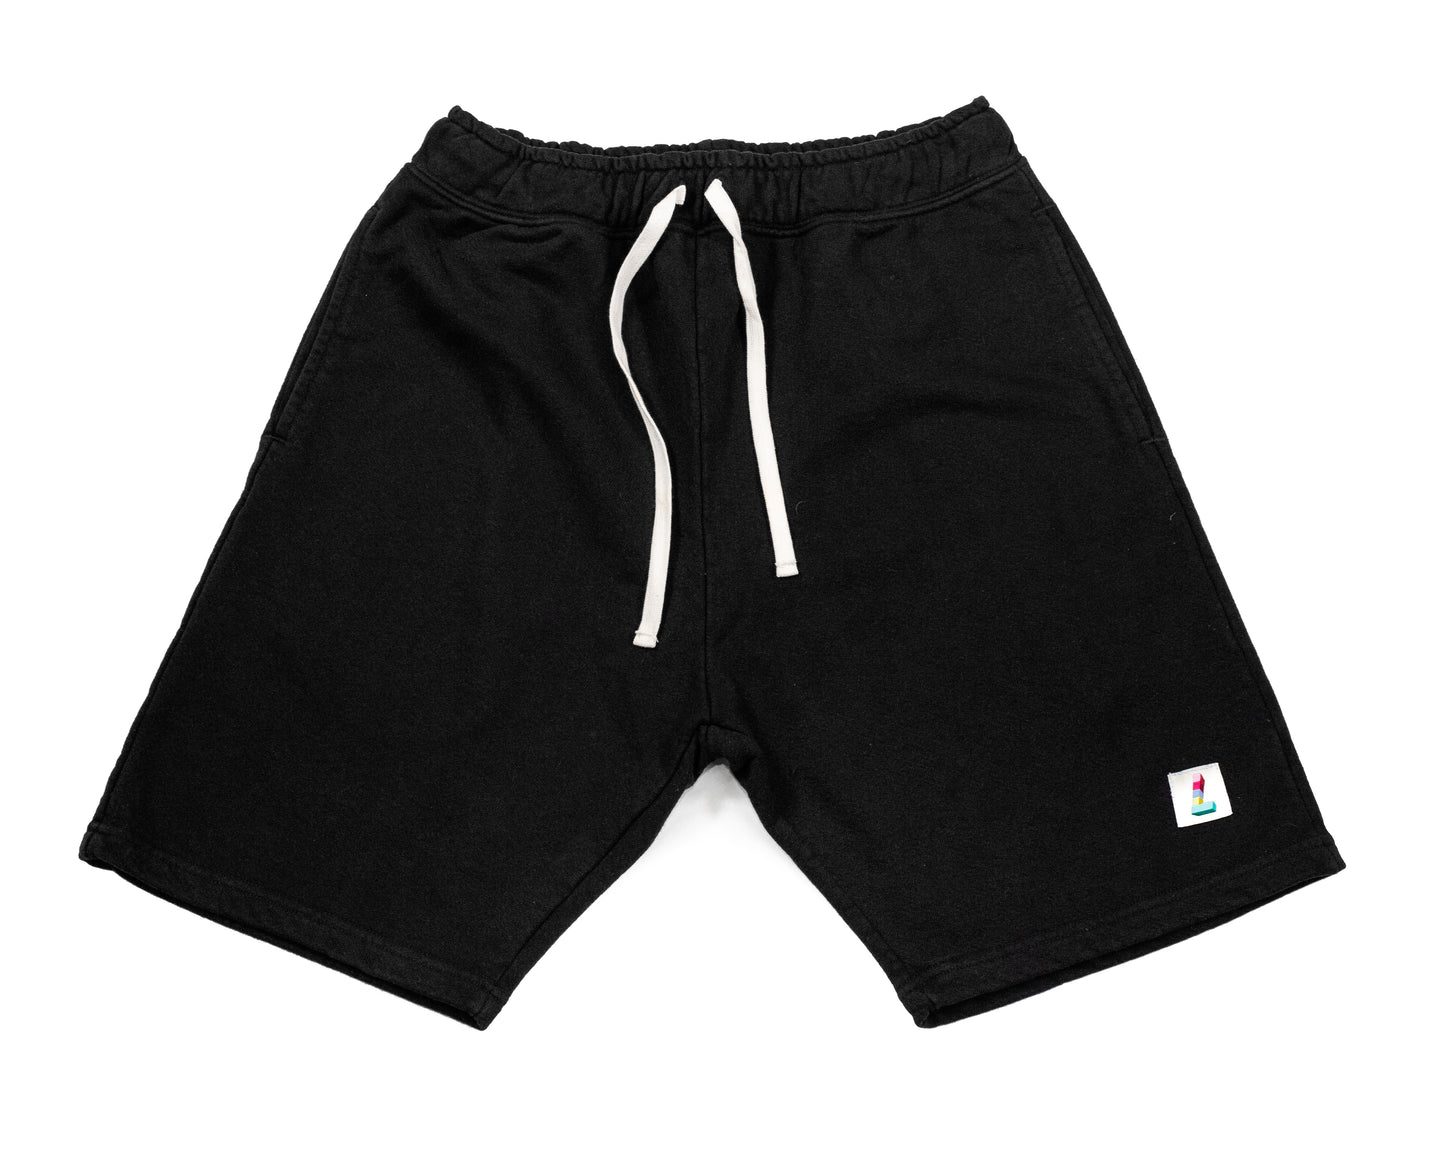 Work Patch Shorts, Black - Layr Official